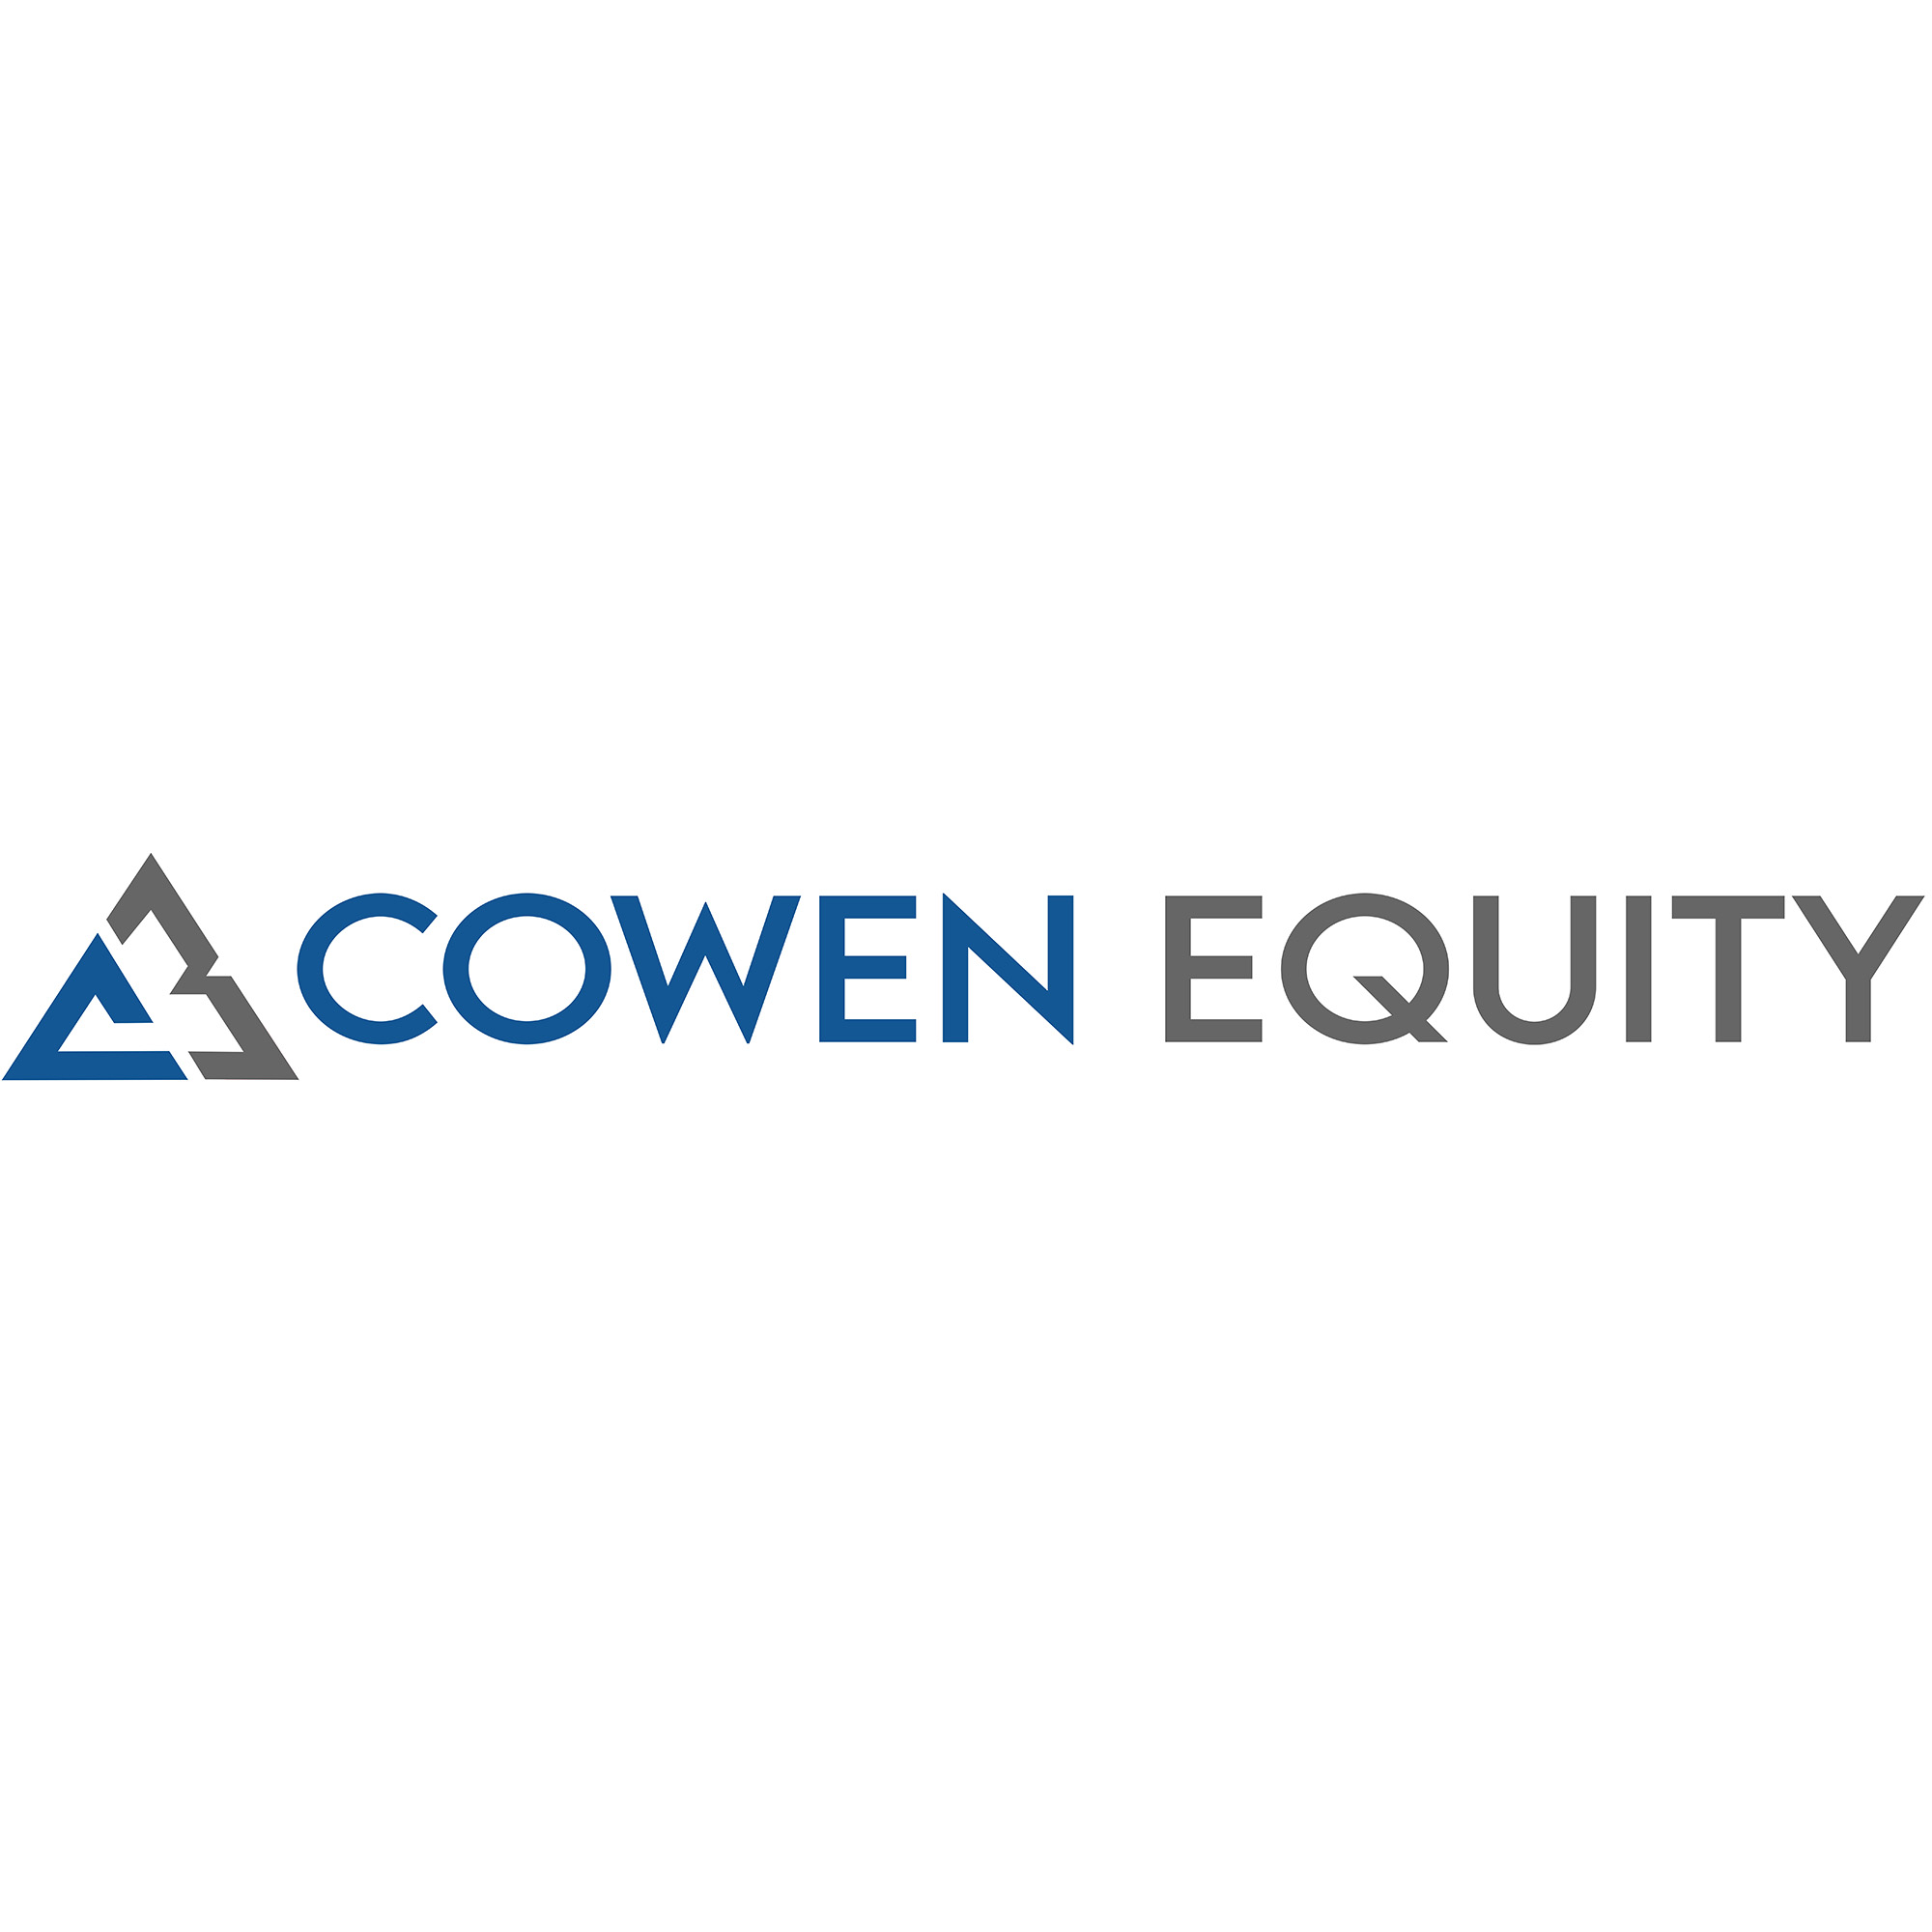 Cowen Equity Corp. switches focus to help with R&D around COVID-19